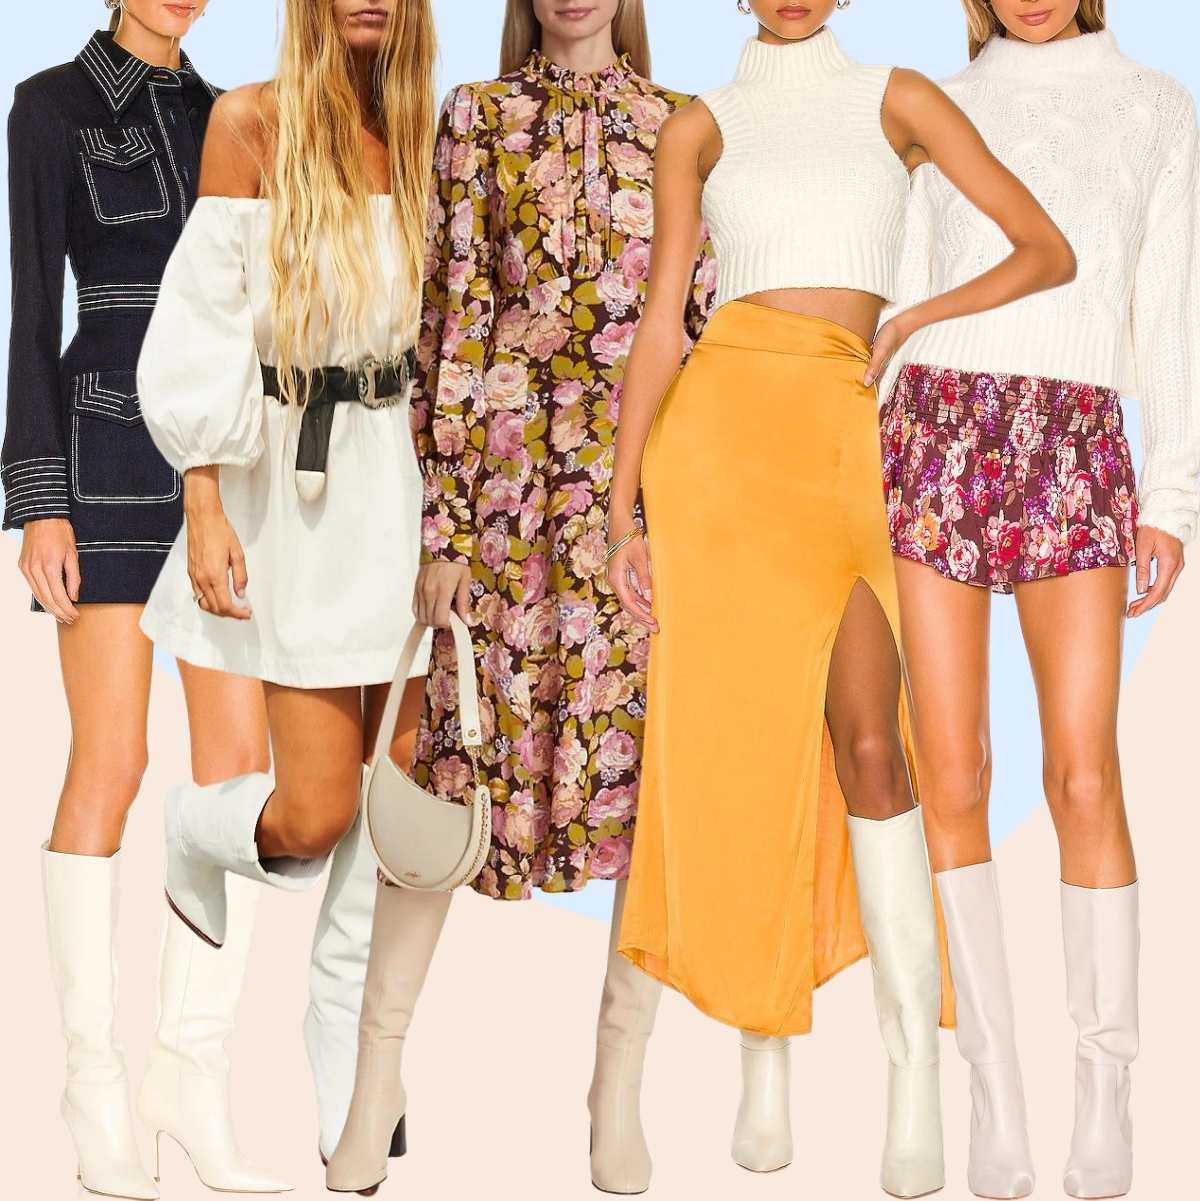 Collage of 5 women wearing different white knee boots outfits.